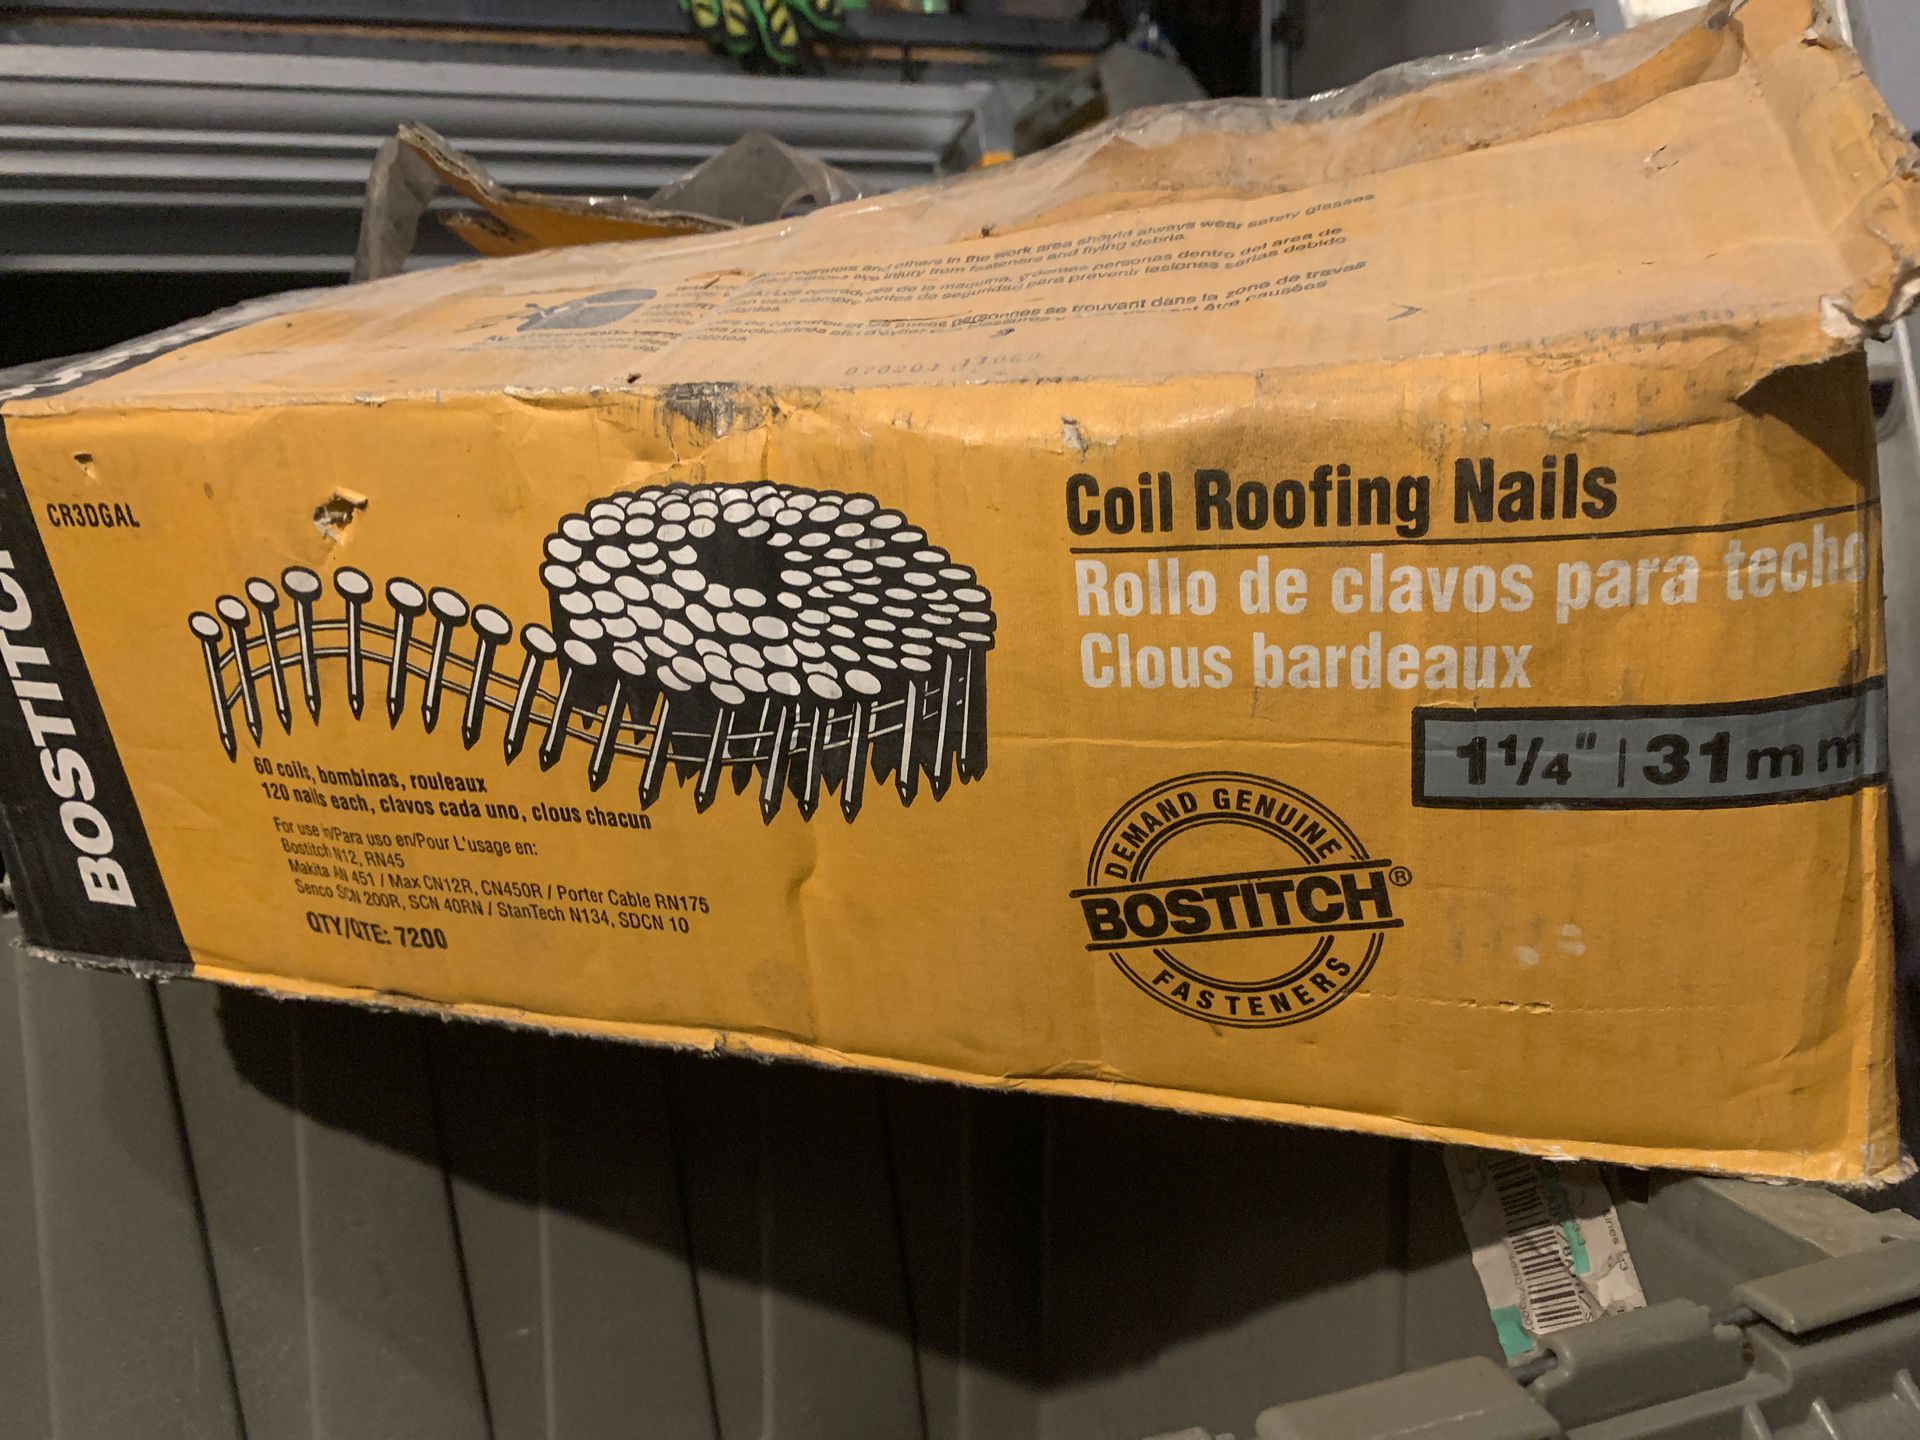 1 1/4” 31mm coil roofing nail